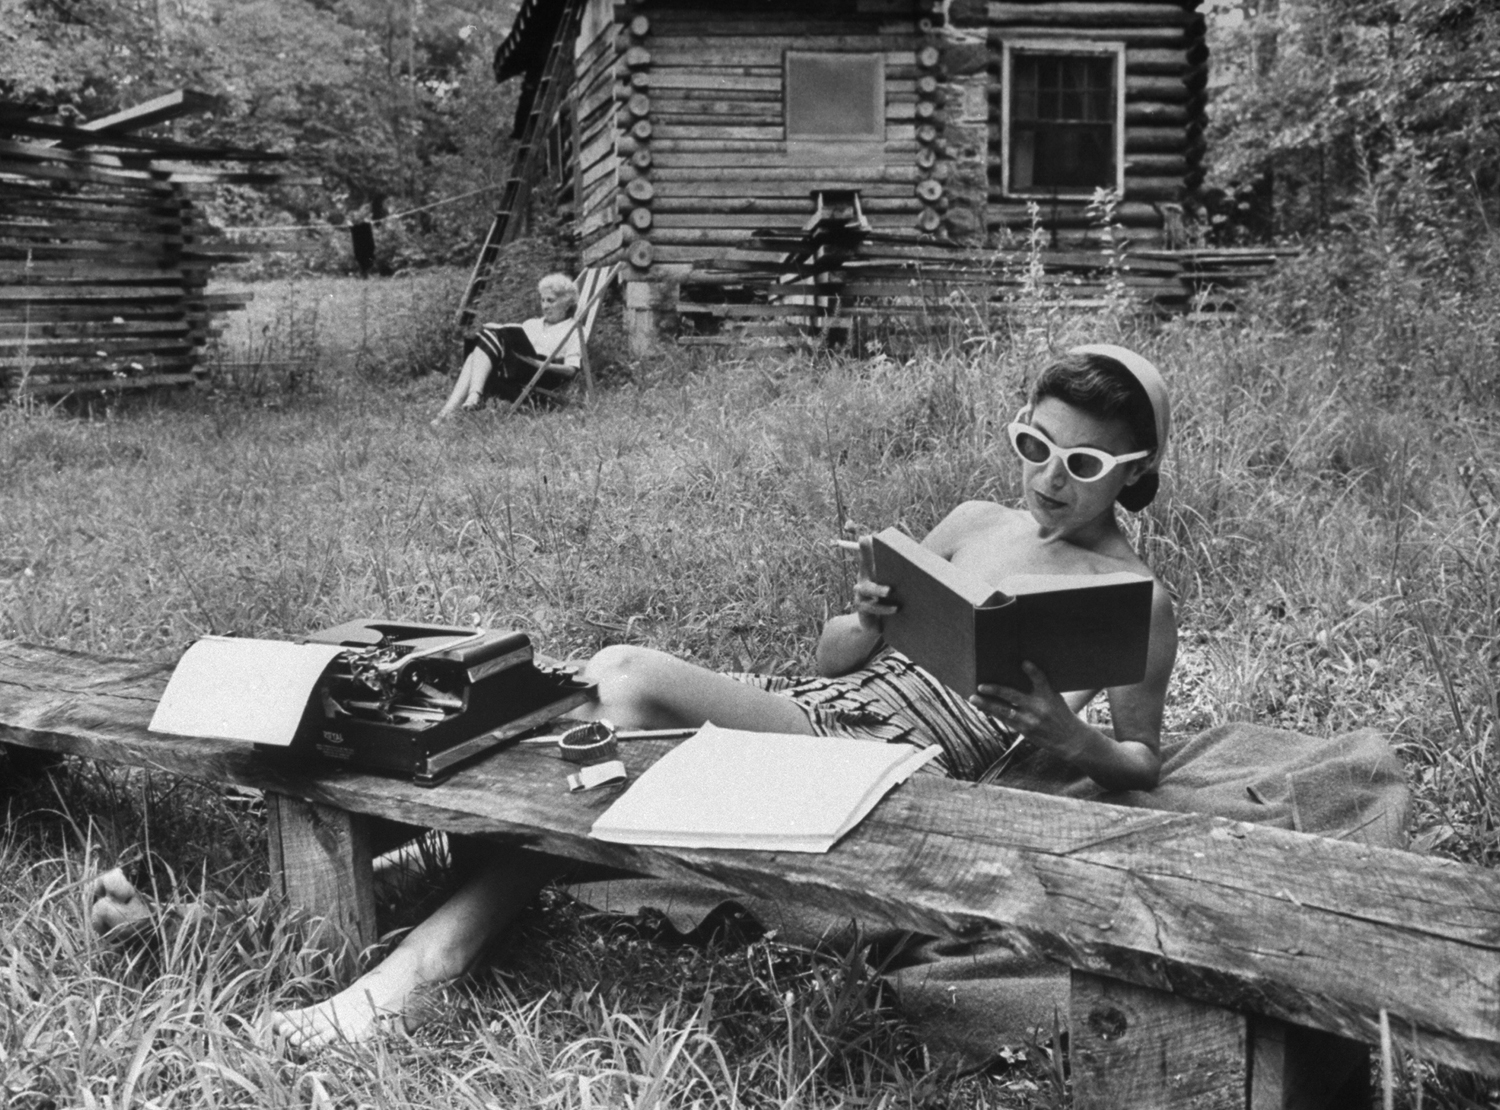 Relaxed writer, Mrs. Helen Lane of New Haven, Conn., checks word for story she is writing at Huckleberry Workshop near Hendersonville, N.C.